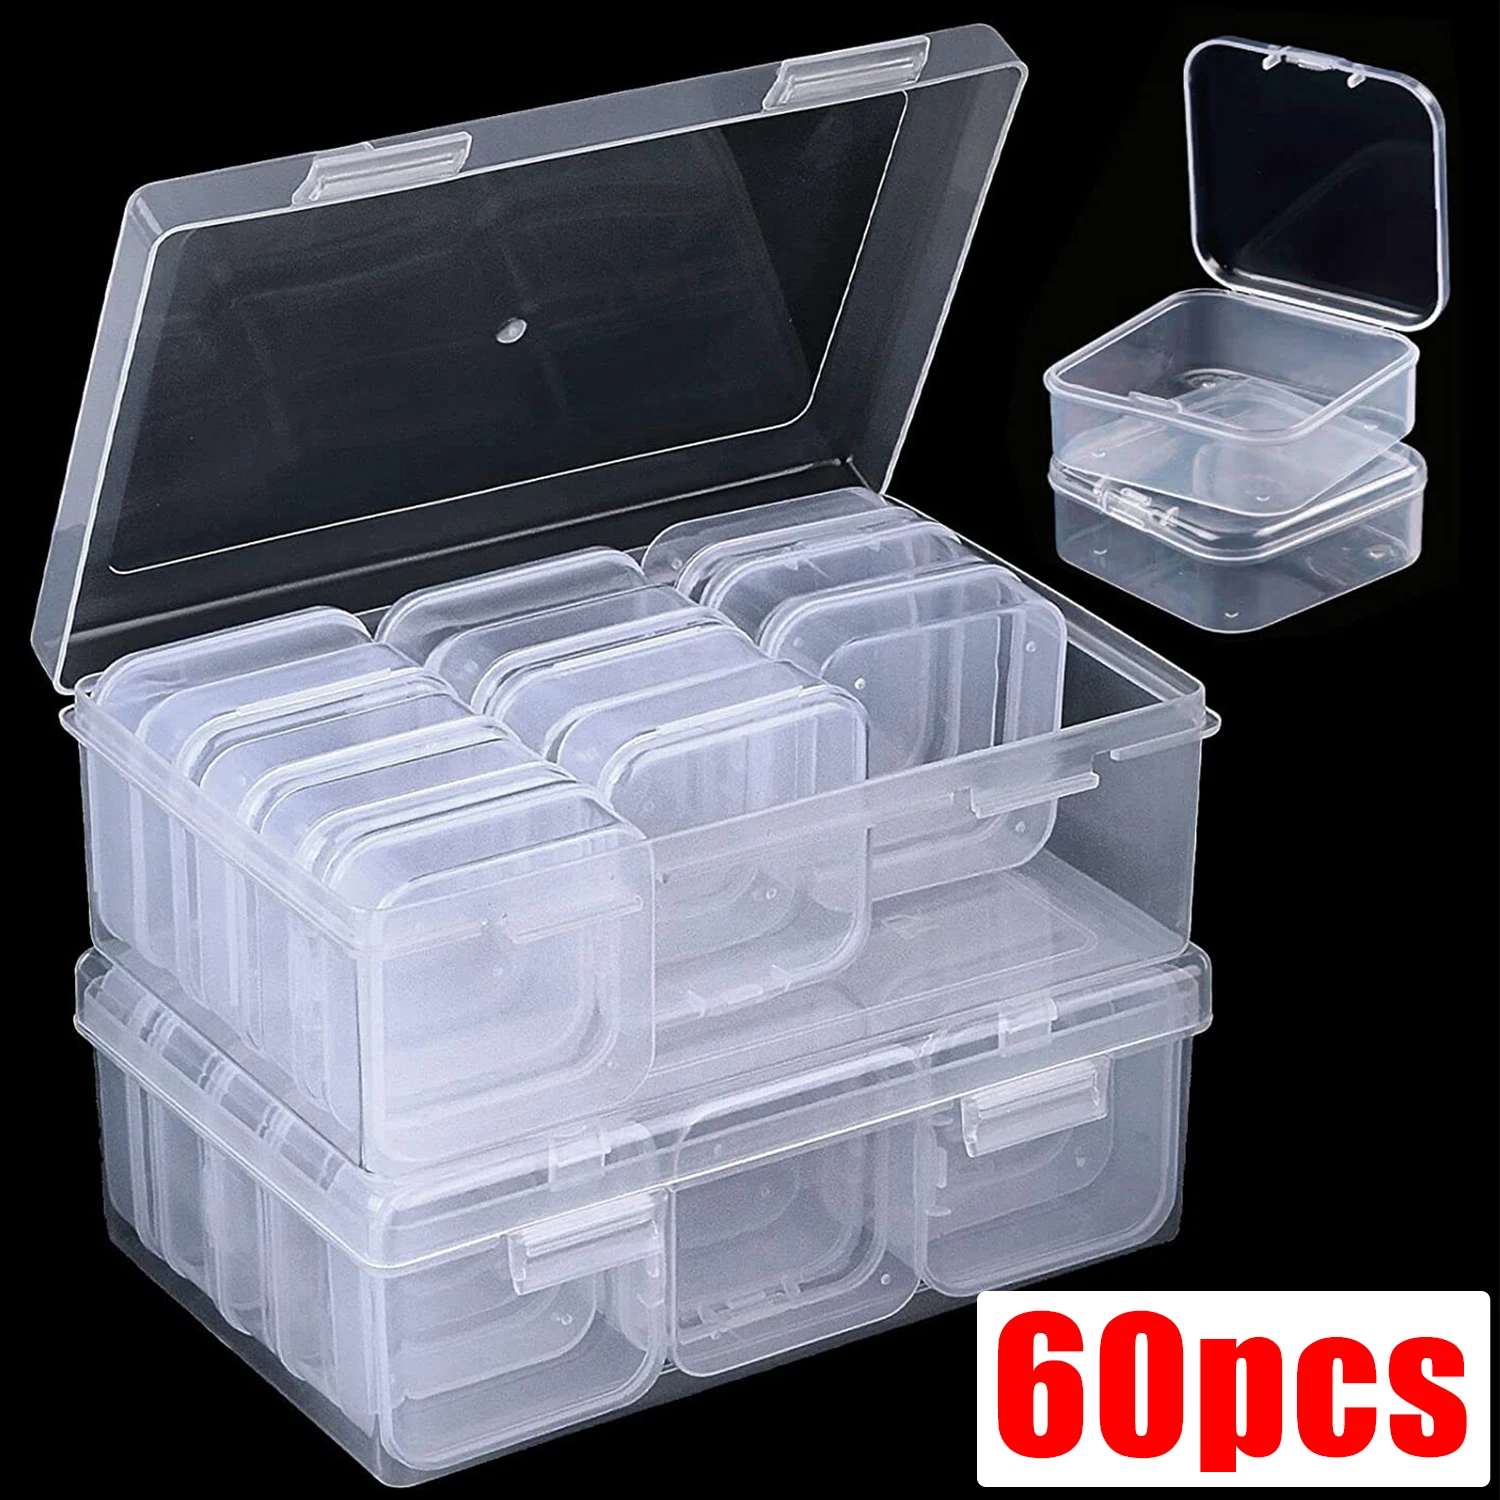 60 Packs Clear Small Plastic Containers Transparent Storage Box with Hinged Lid for Items Crafts Jewelry Package Clear Cases 40 pcs watch display stand plastic watch holder clear watch stand plastic jewelry stand